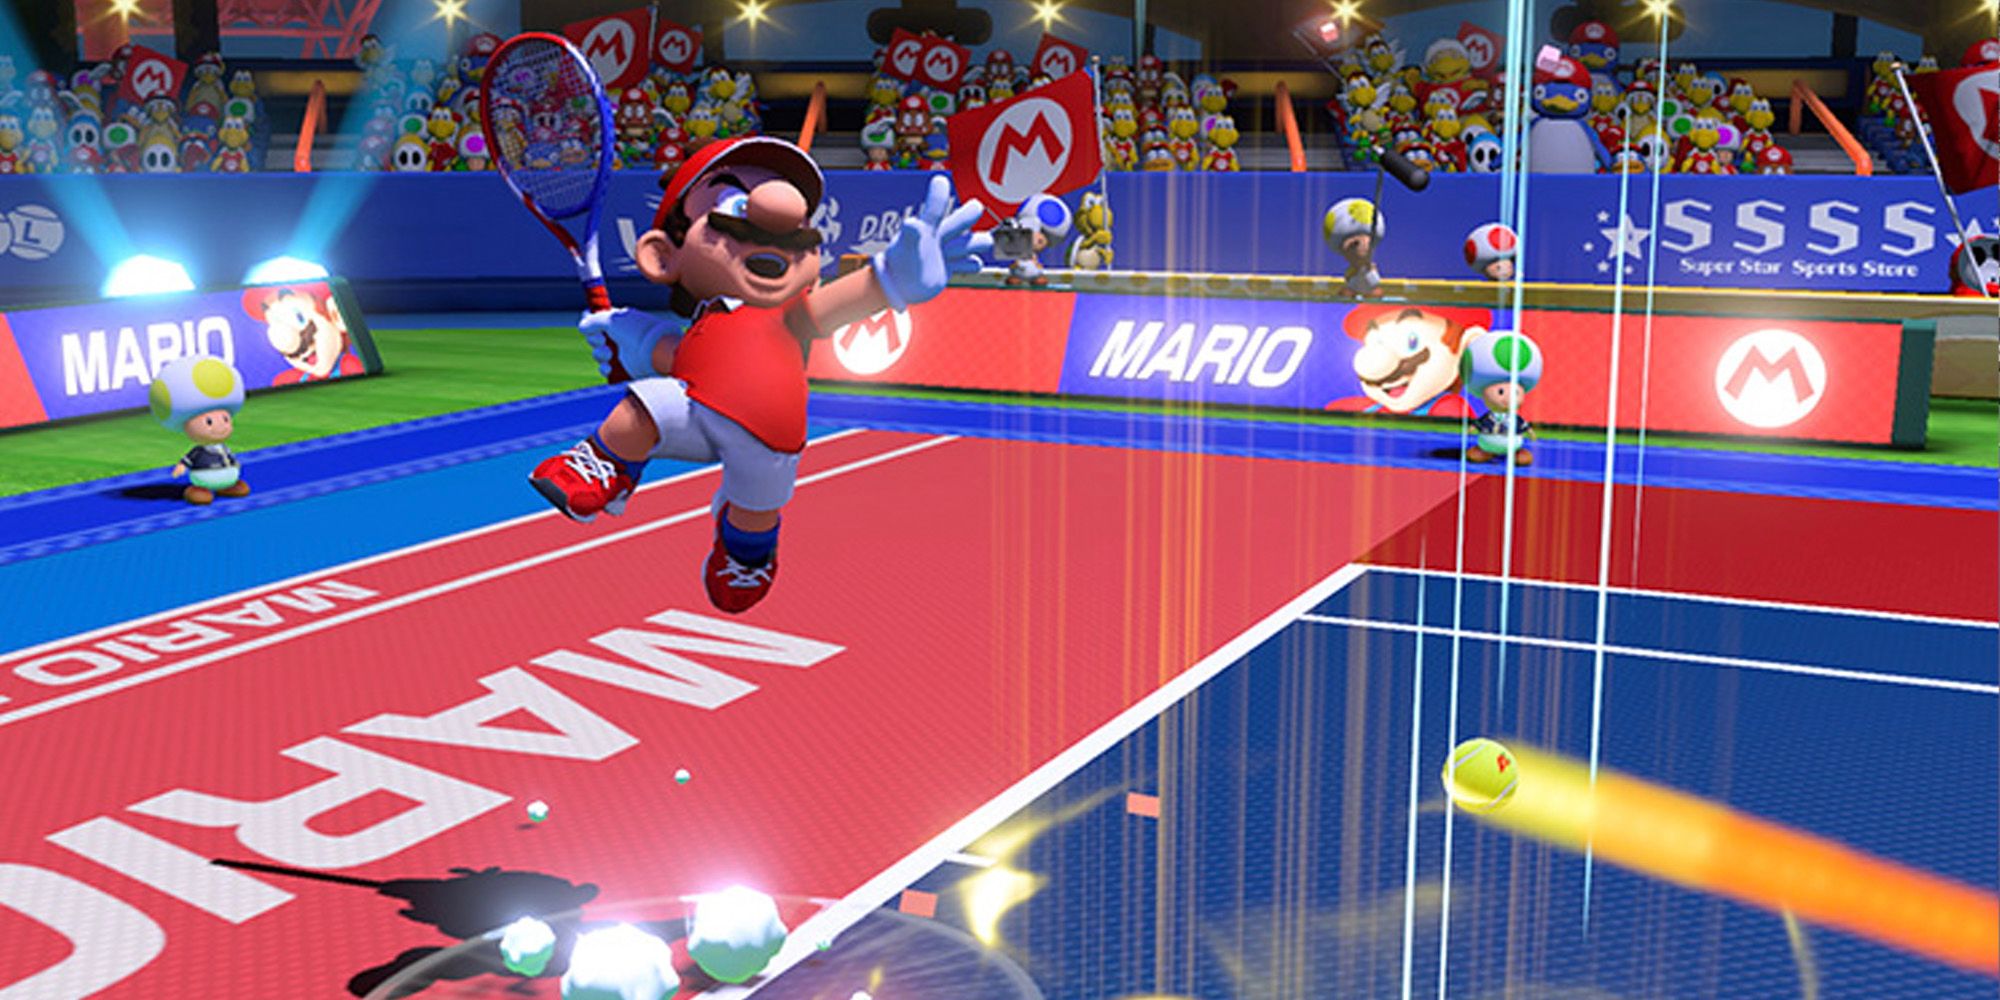 Mario ready to smash the ball and score a point in Mario Tennis Aces for the Nintendo Switch